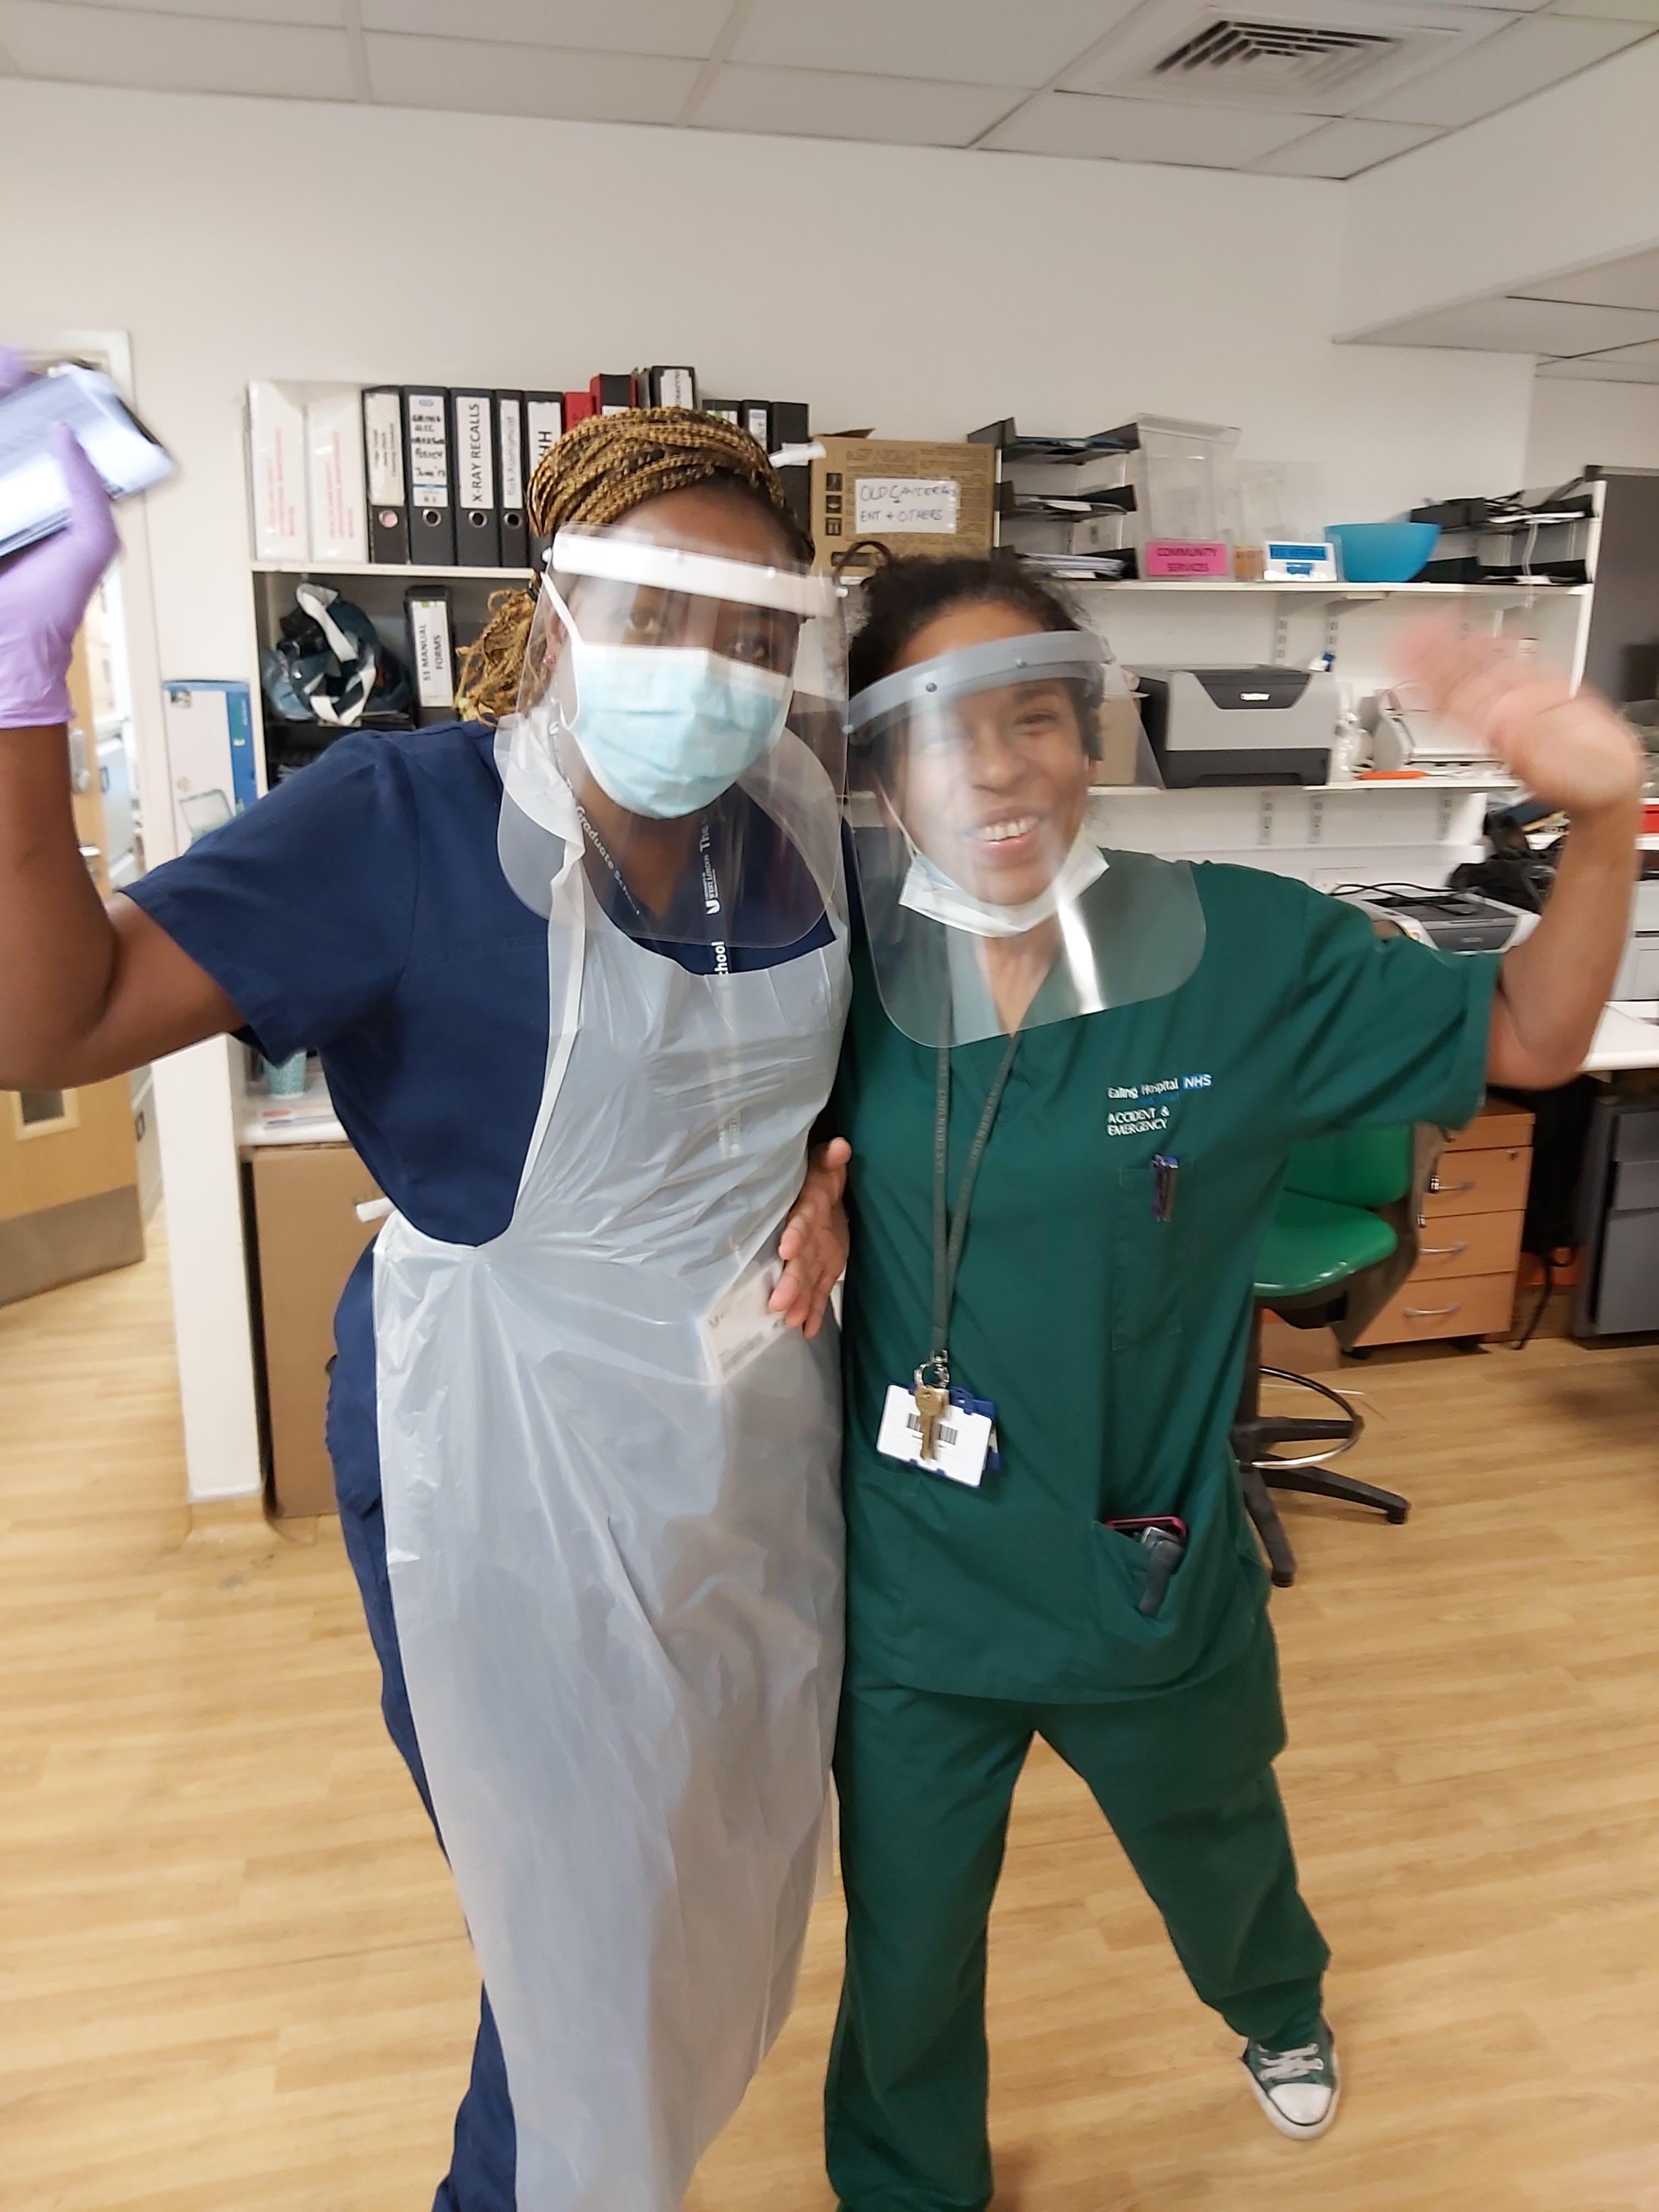 Two women in scrubs wearing plastic face visors and smiling